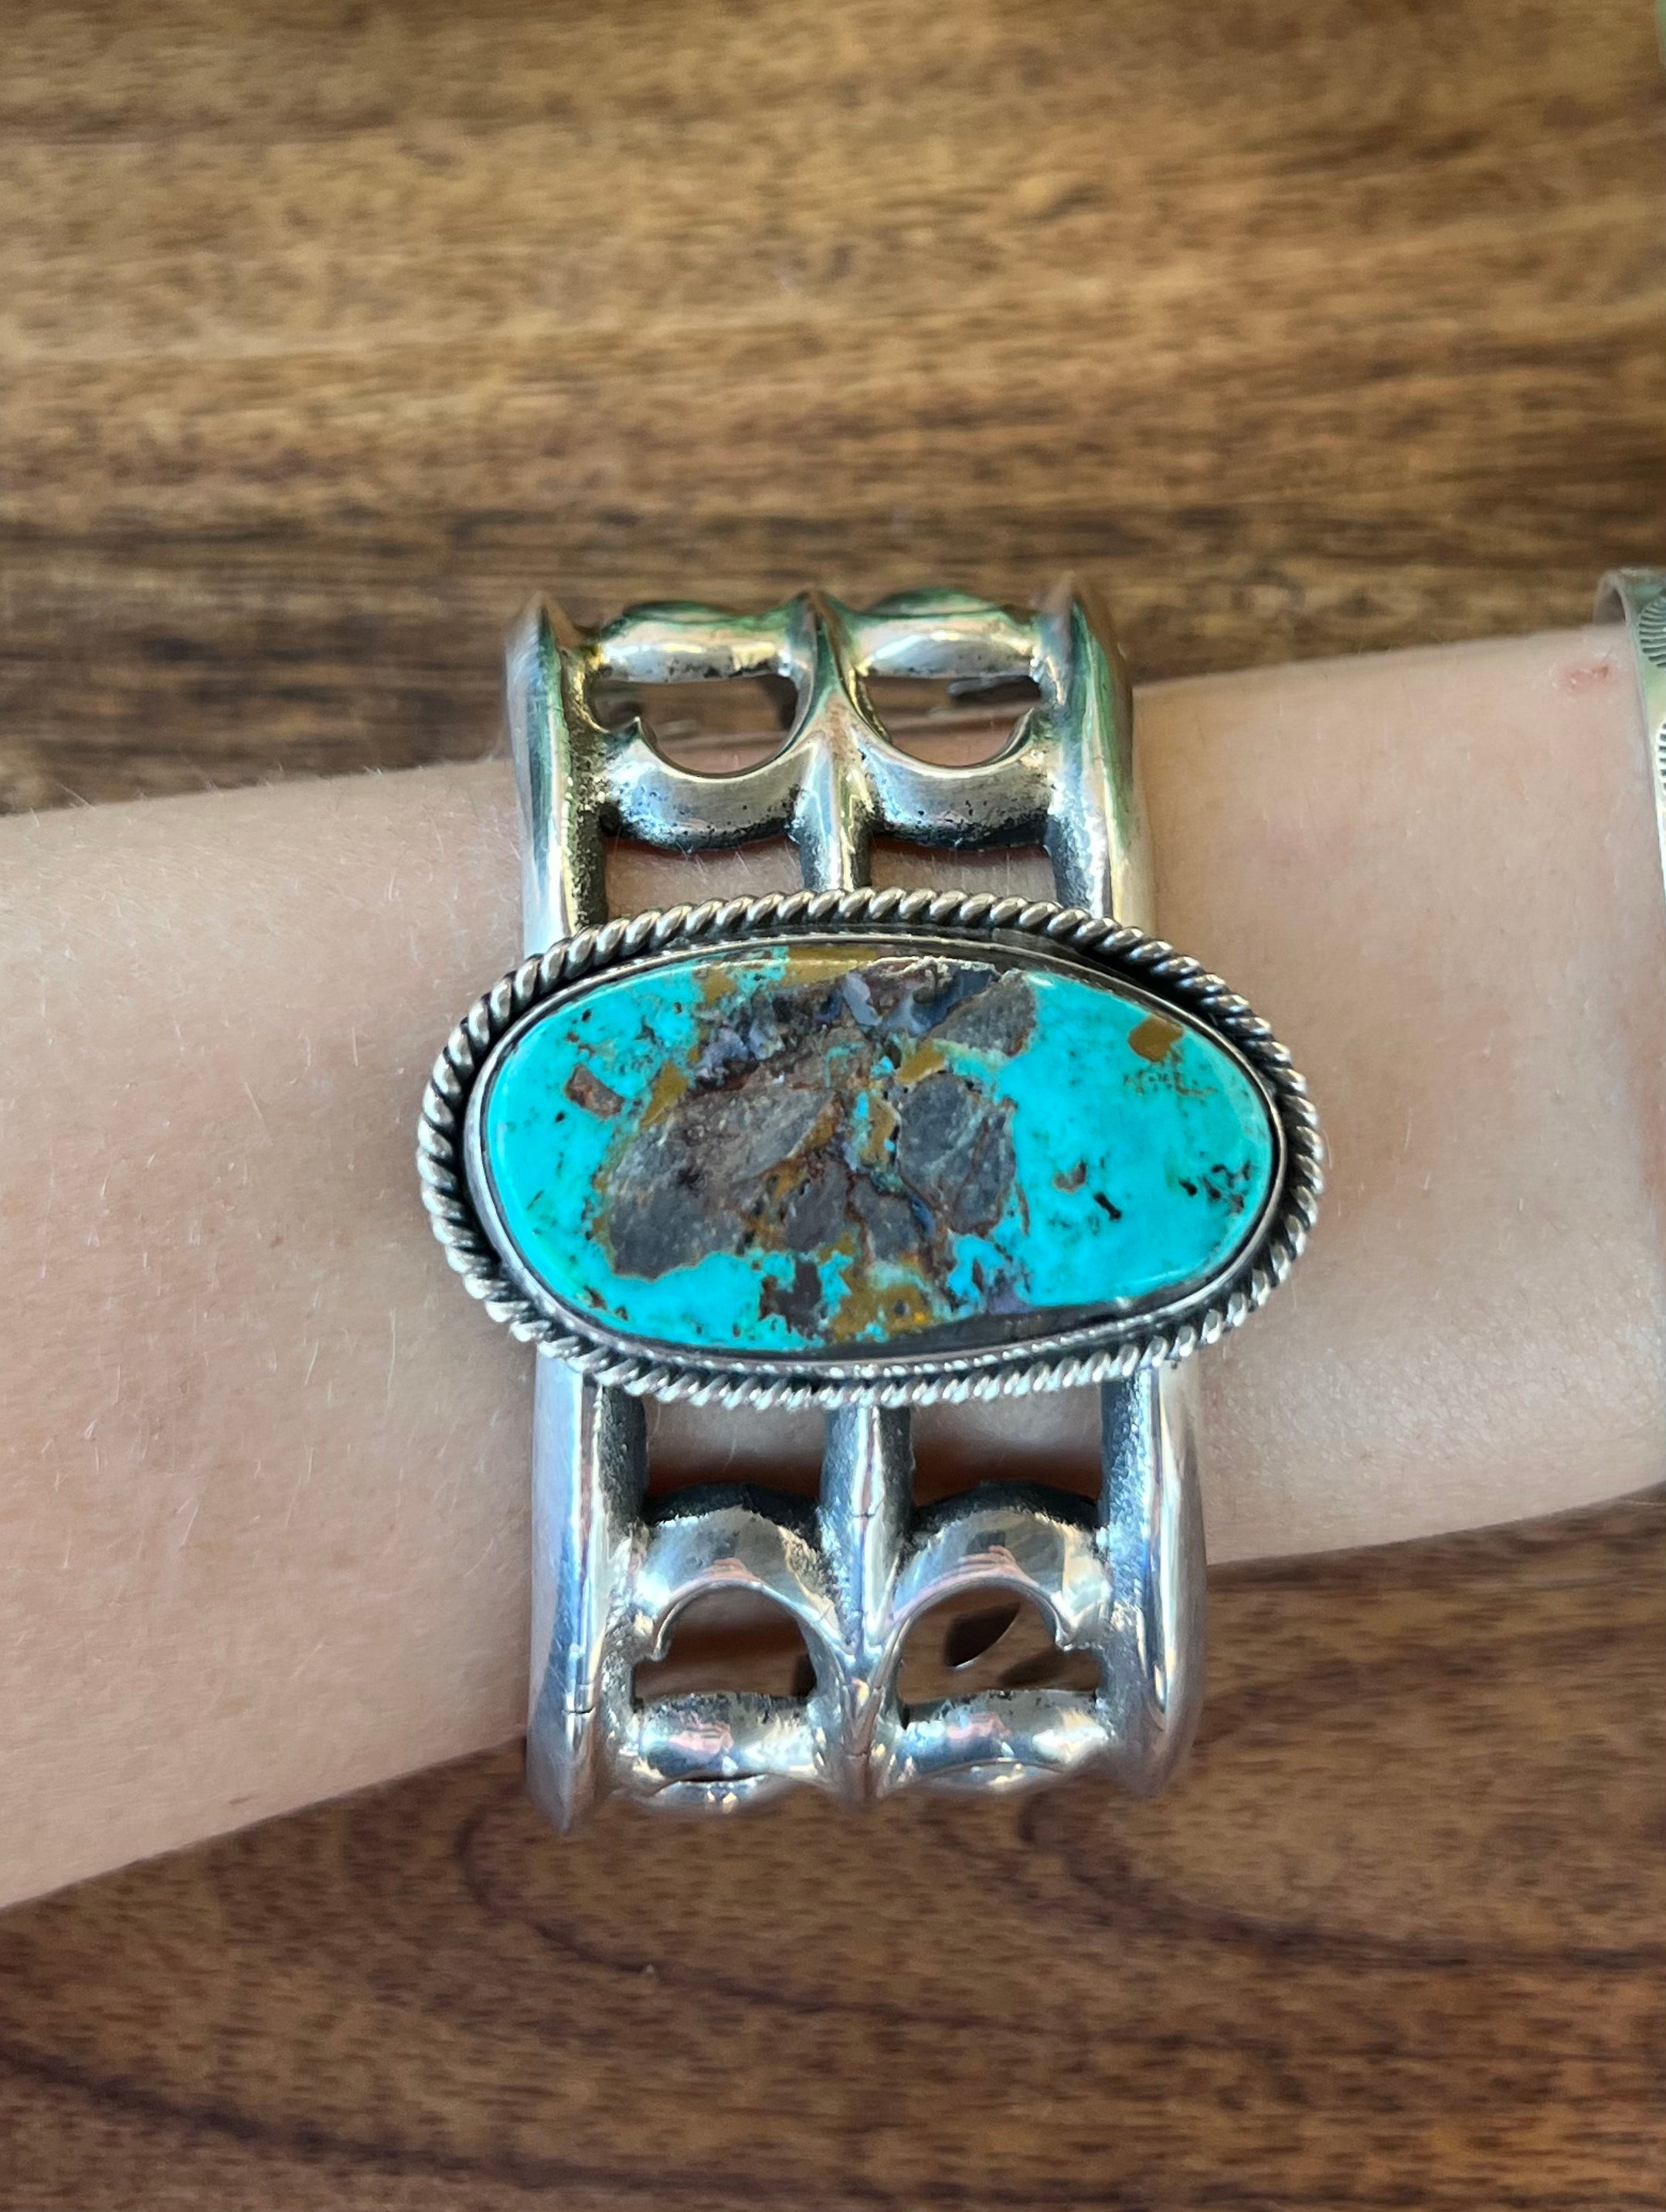 Vintage Mike Platero Royston Turquoise & Sterling Silver Cuff Bracelet